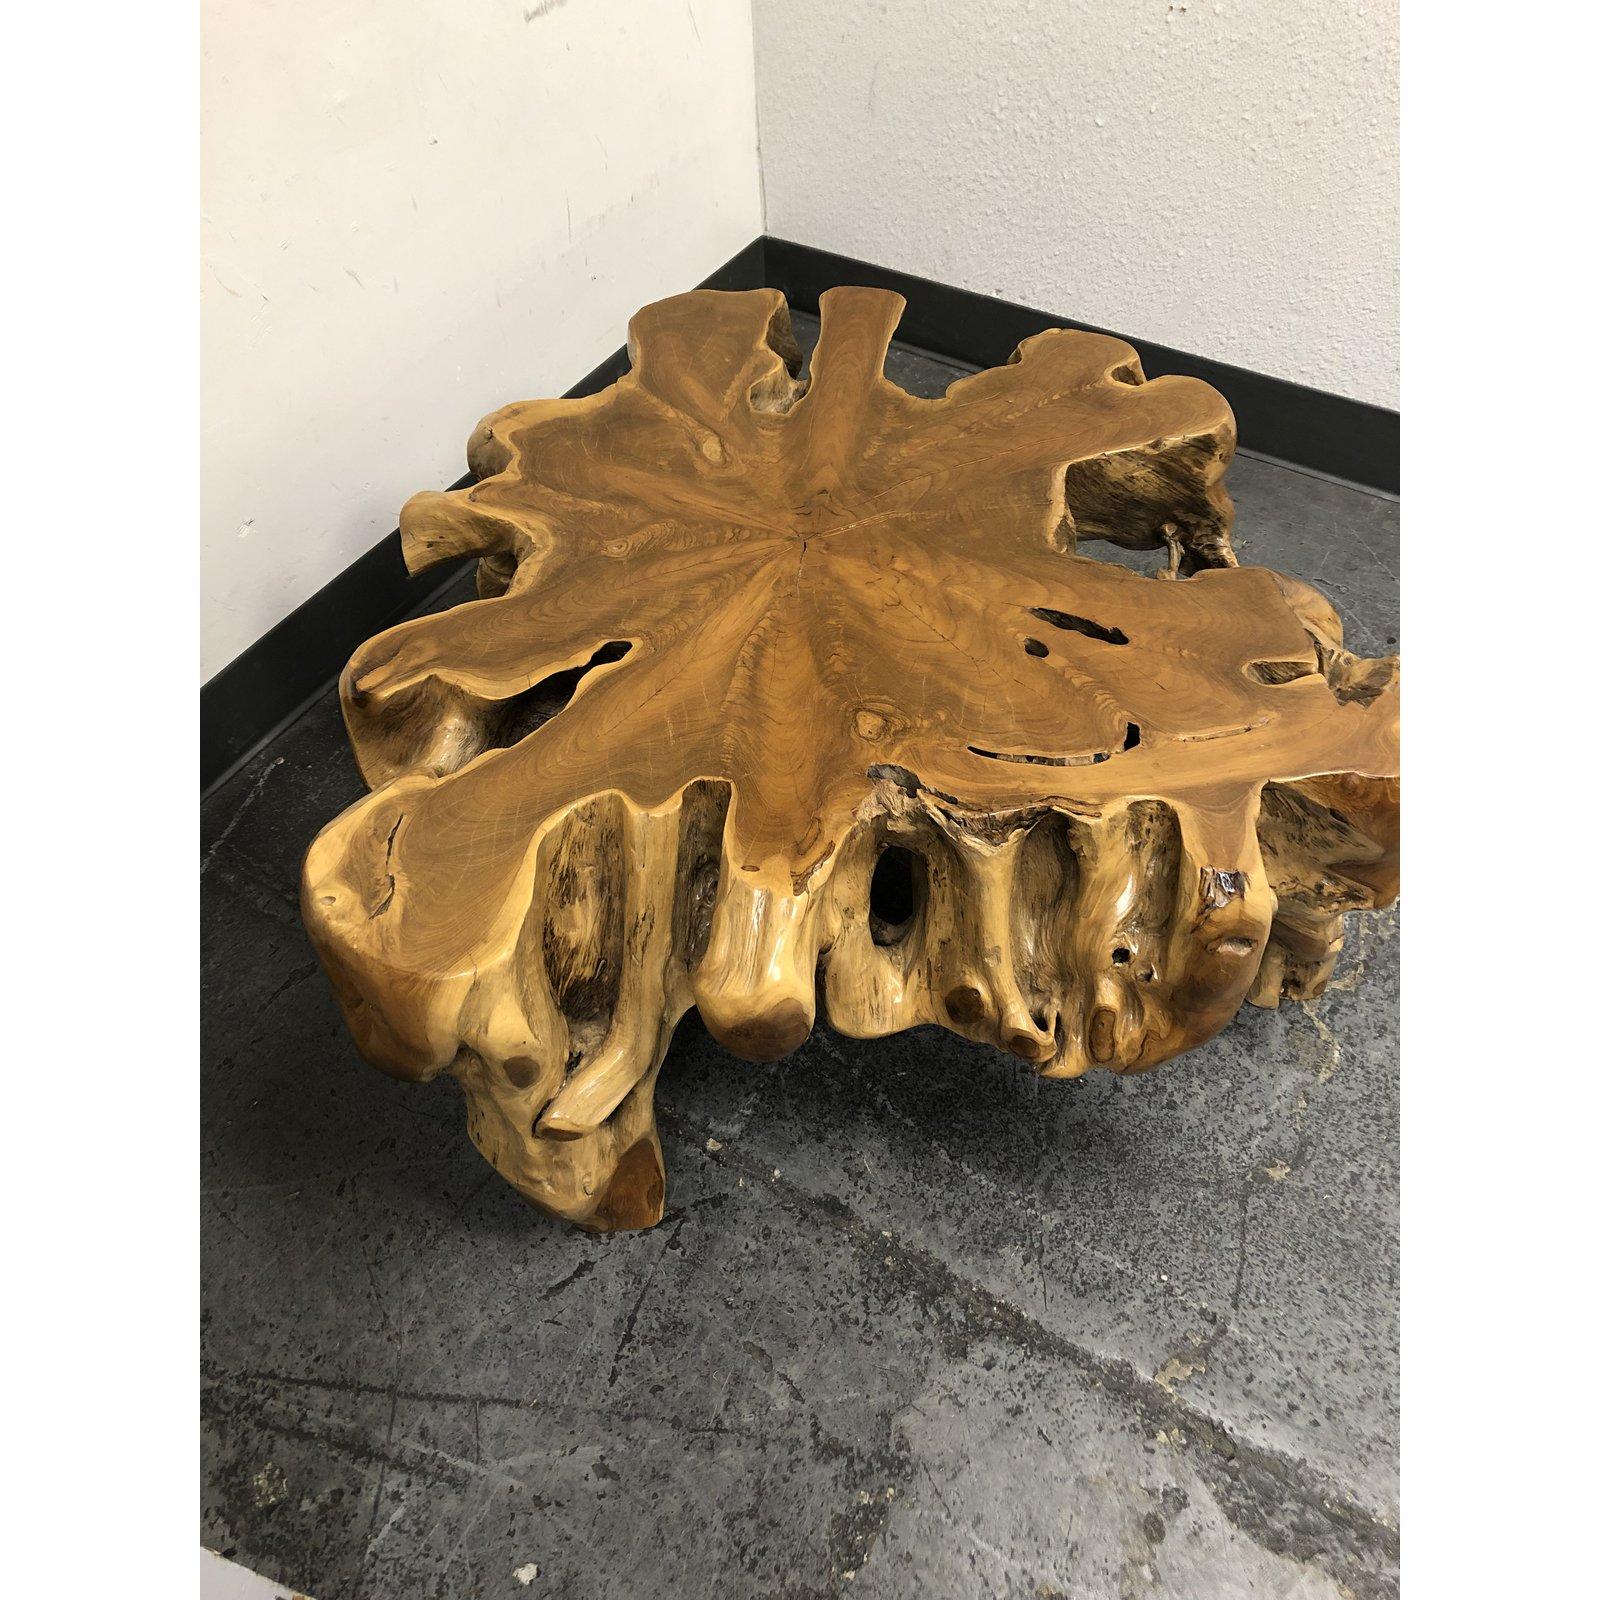 A salvaged teak root coffee table. Handcrafted from salvaged wood from Indonesia. Dug up from the ground, this beauty has been polished and given a clear natural finish. Bring this natural earth element into your space.
 